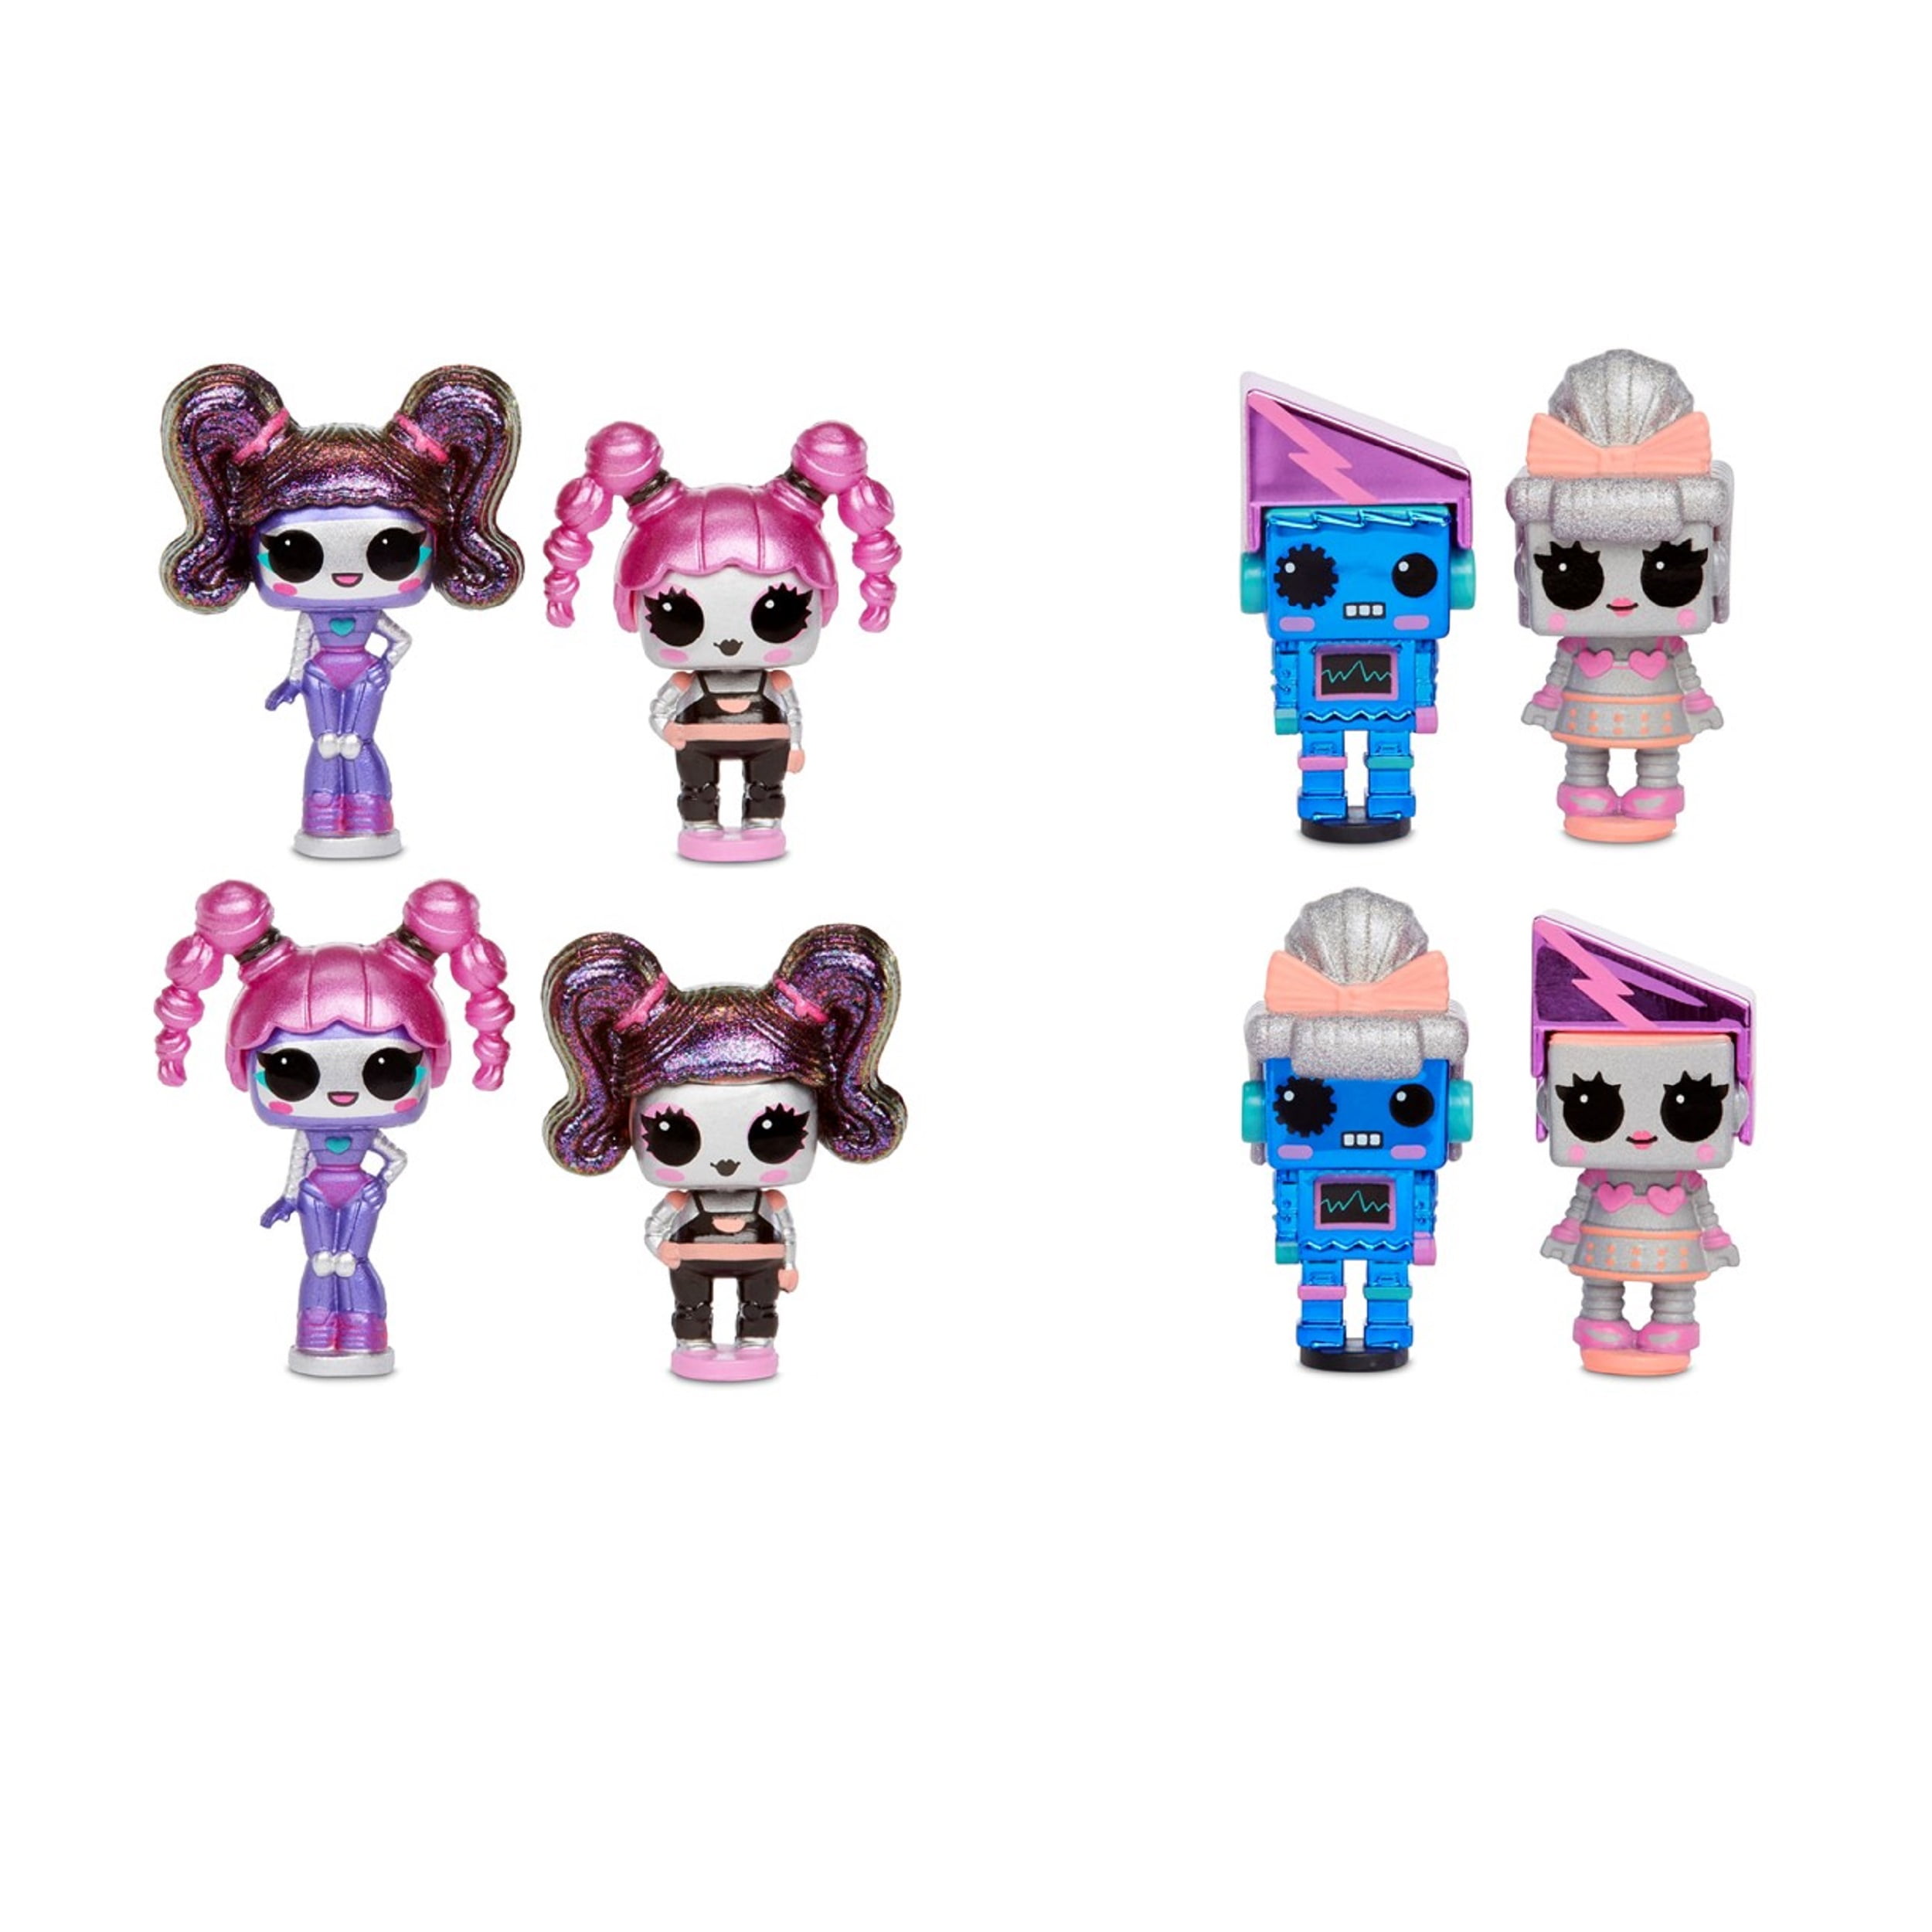 L.O.L. Surprise Tiny Toys - Collect to Build Glamper - Walmart.com